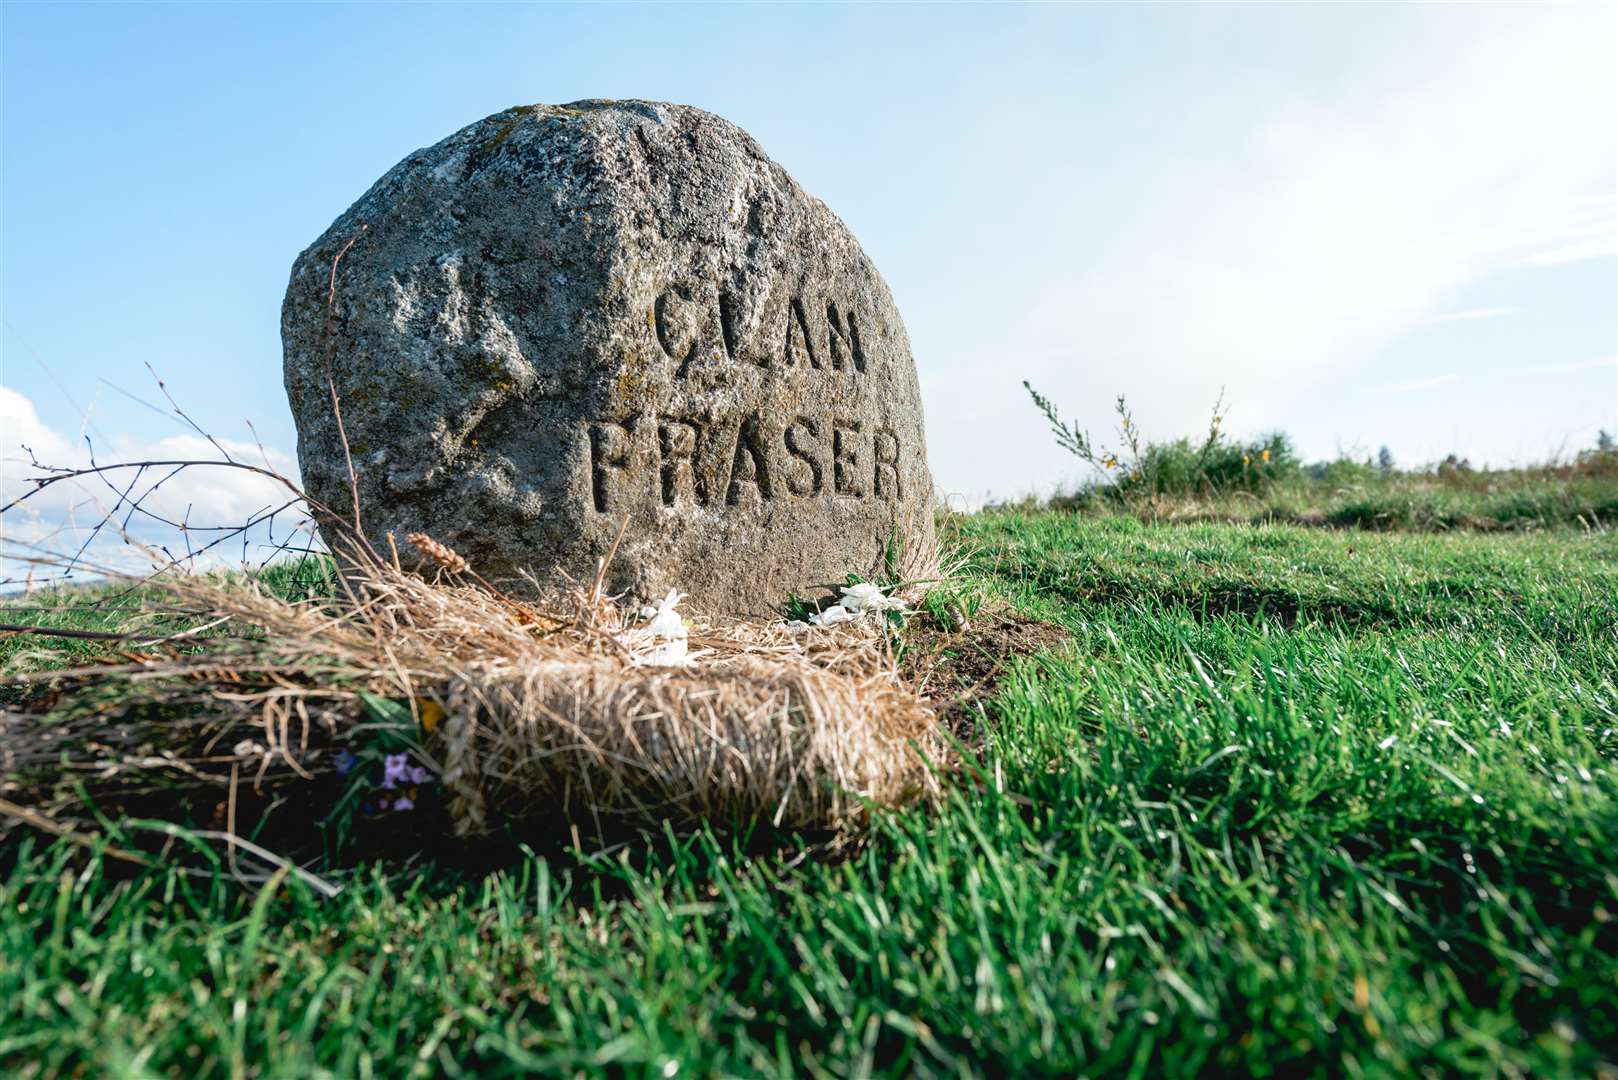 The Clan Fraser burial stone at Culloden. Photo: Adobe Stock